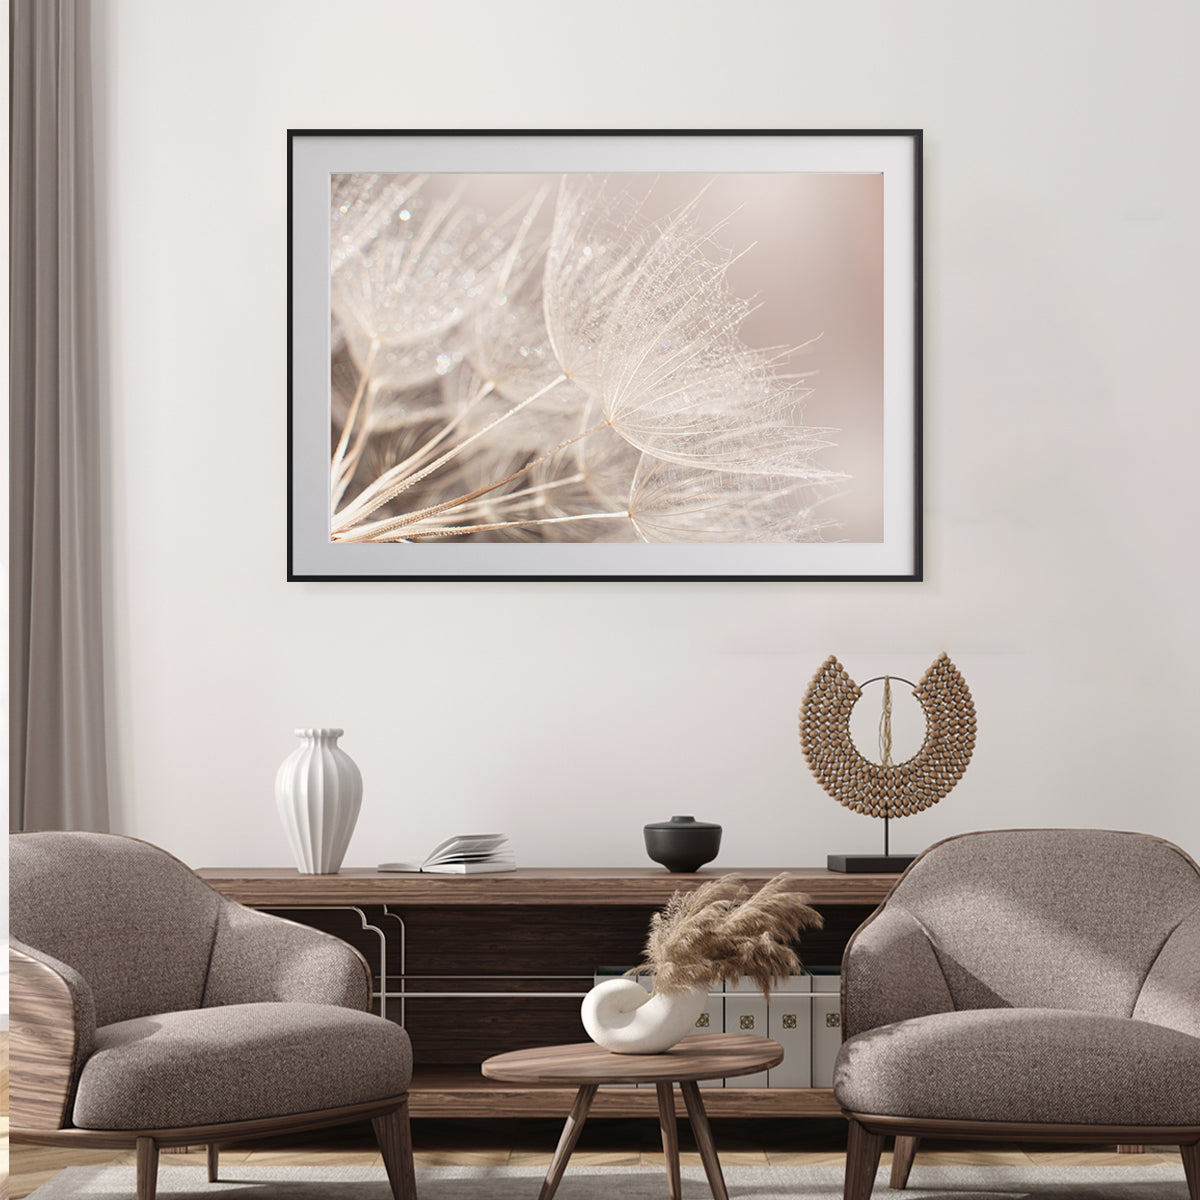 Fluffy Dandelion Silhouette Pastel Colors Posters-Horizontal Posters NOT FRAMED-CetArt-10″x8″ inches-CetArt